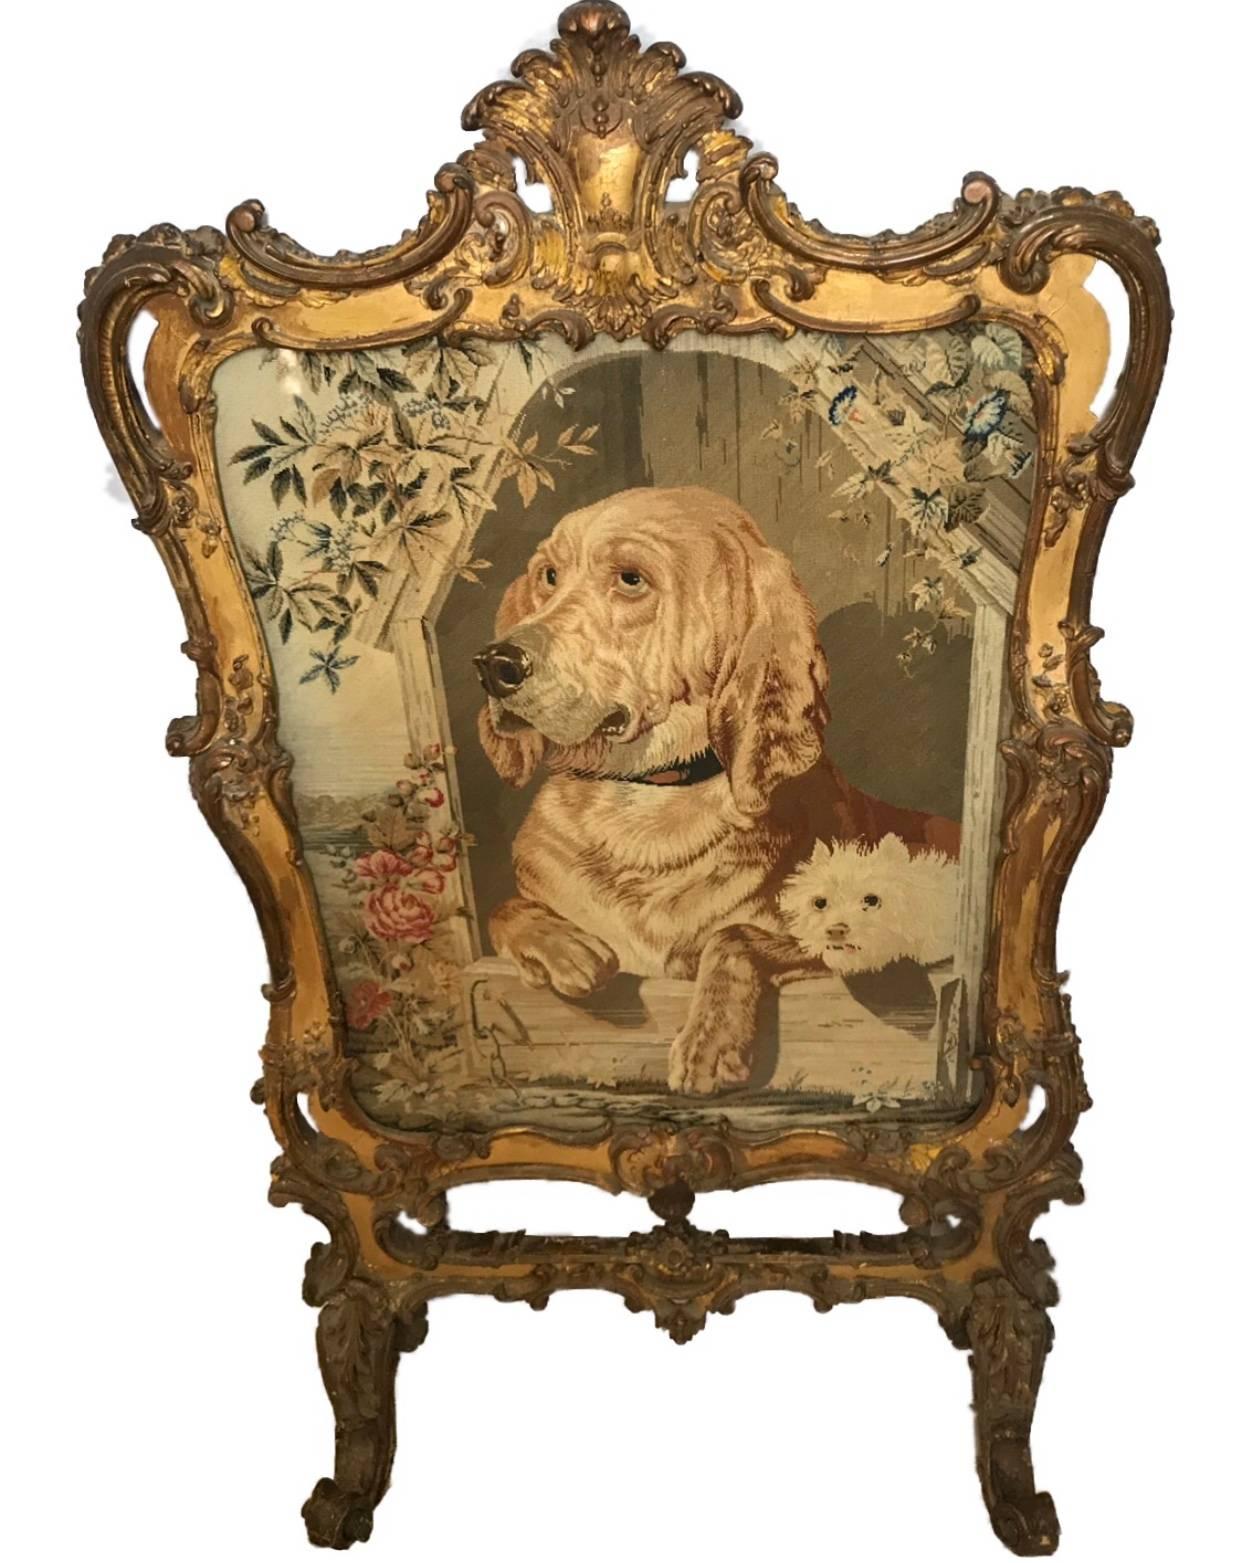 Fine and very imposing Regency giltwood tapestry fire screen.
The centre glazed tapestry depicting two dogs housed within a kennel surrounded by the carved giltwood frame with scrolling acanthus leaves.